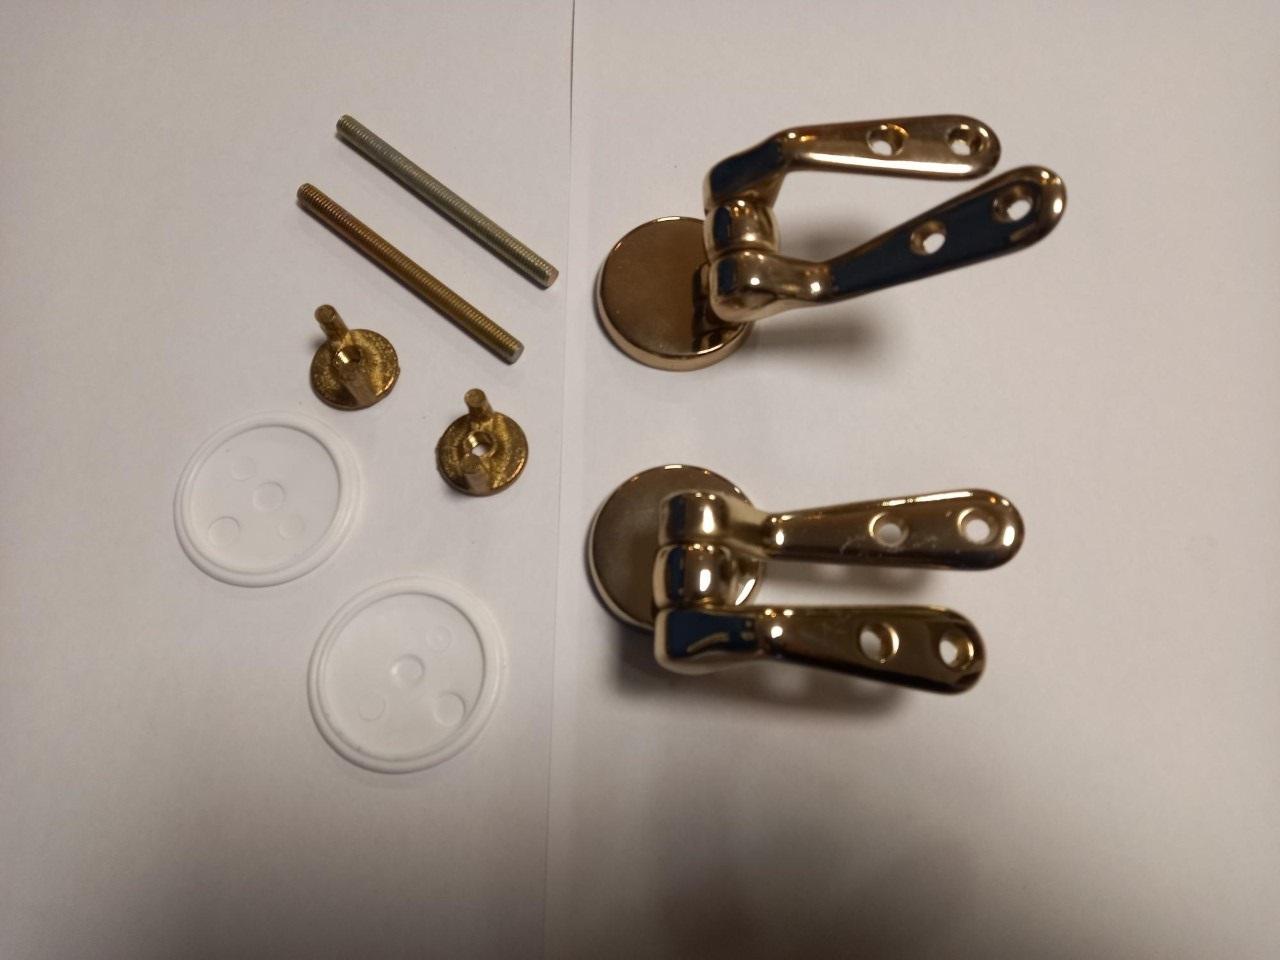 gold plated toilet seat hinges wood